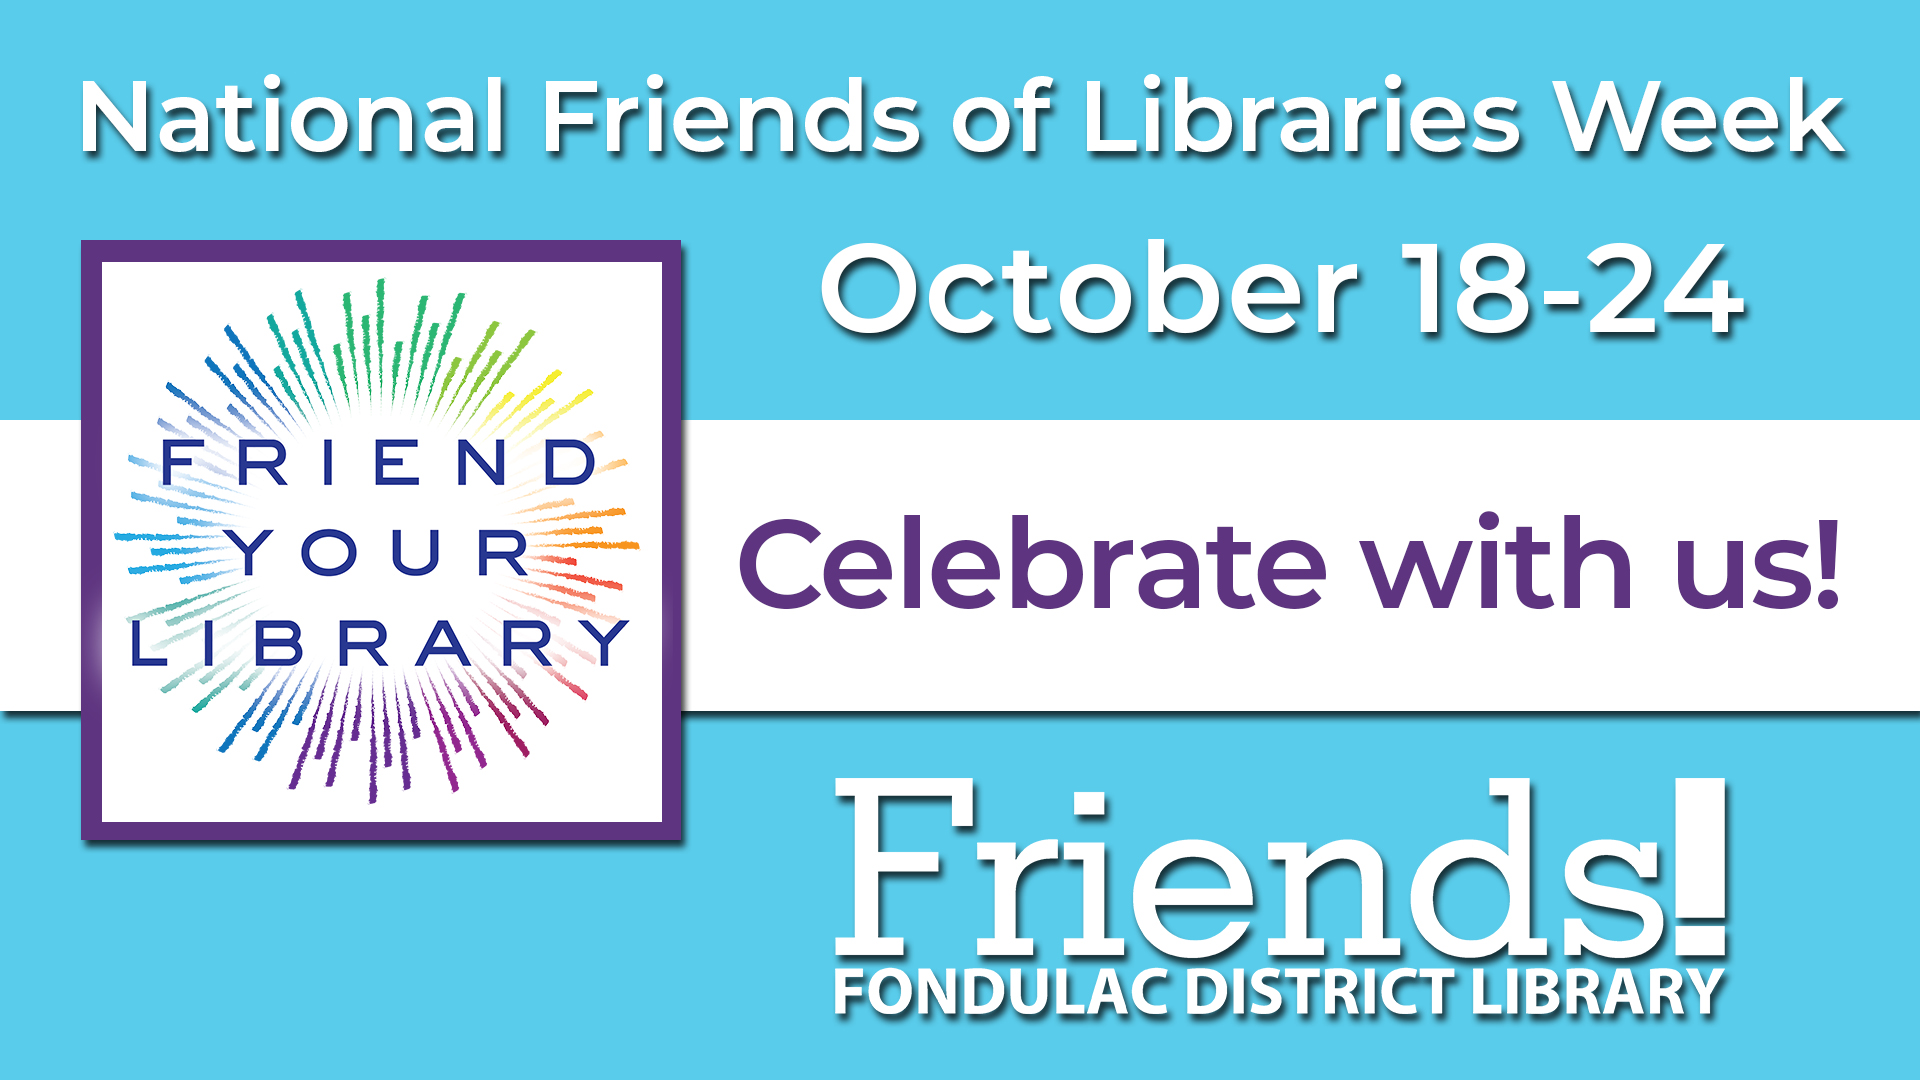 National Friends of Libraries Week Fondulac District Library East